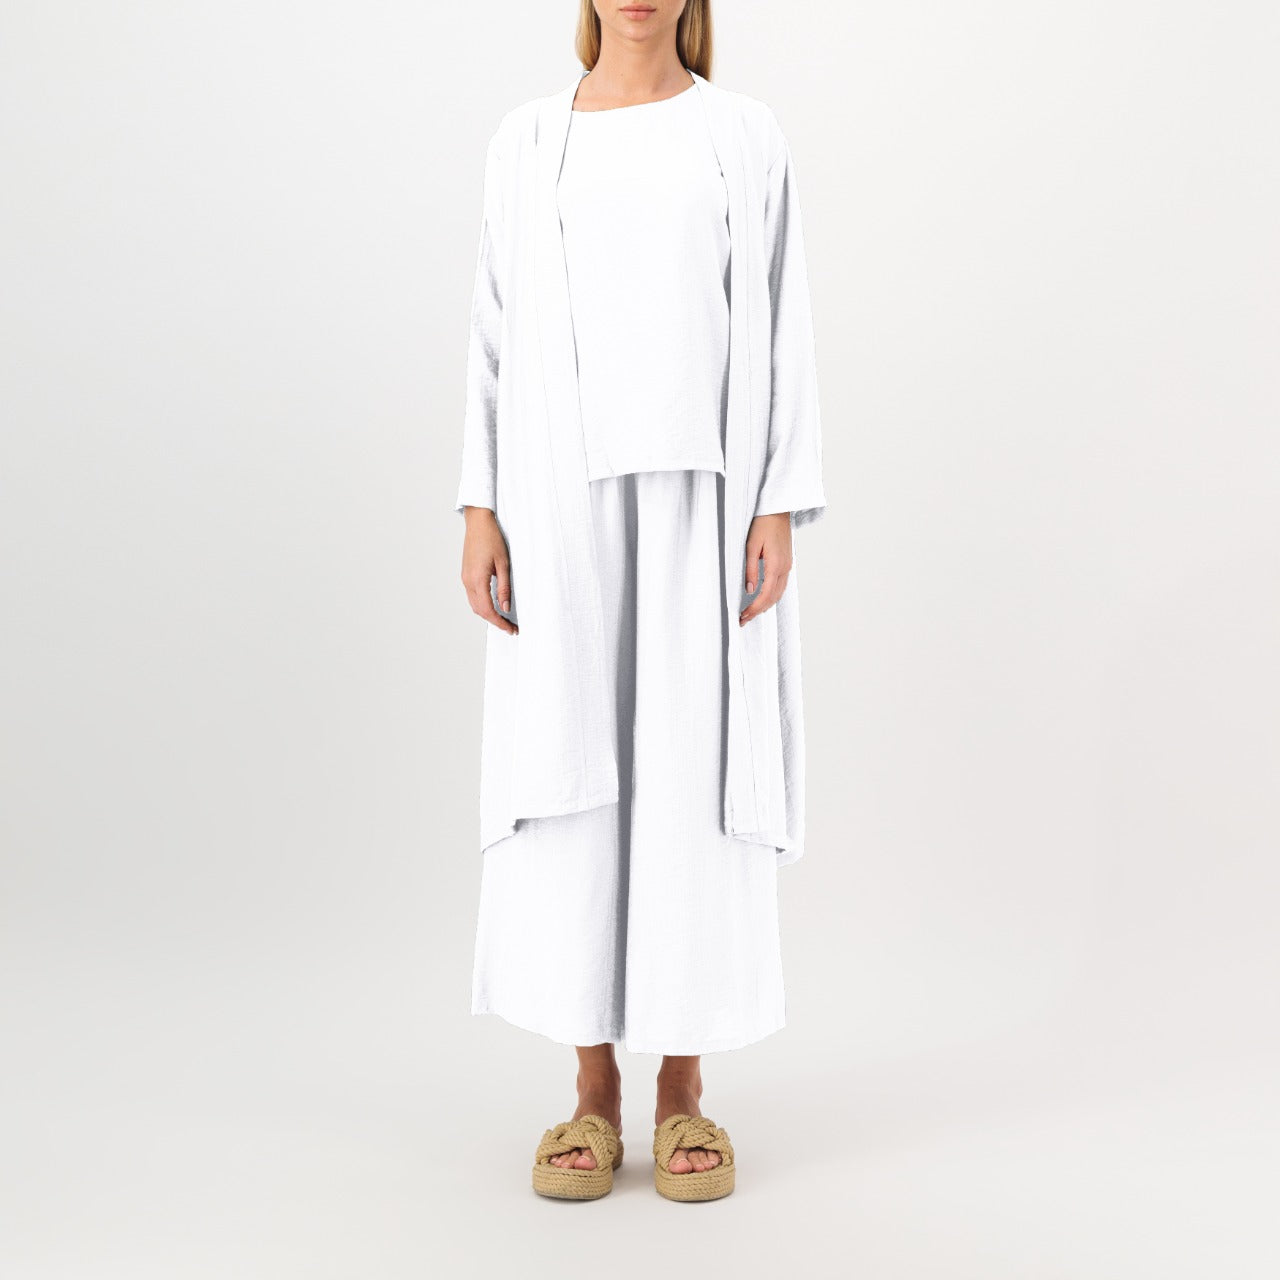 The White set of 3 Outfit  -  All Day Closet  - Comfortable style in attractive colors - arabian outfit - casual setcasual set - all day outfits - closet fashion store